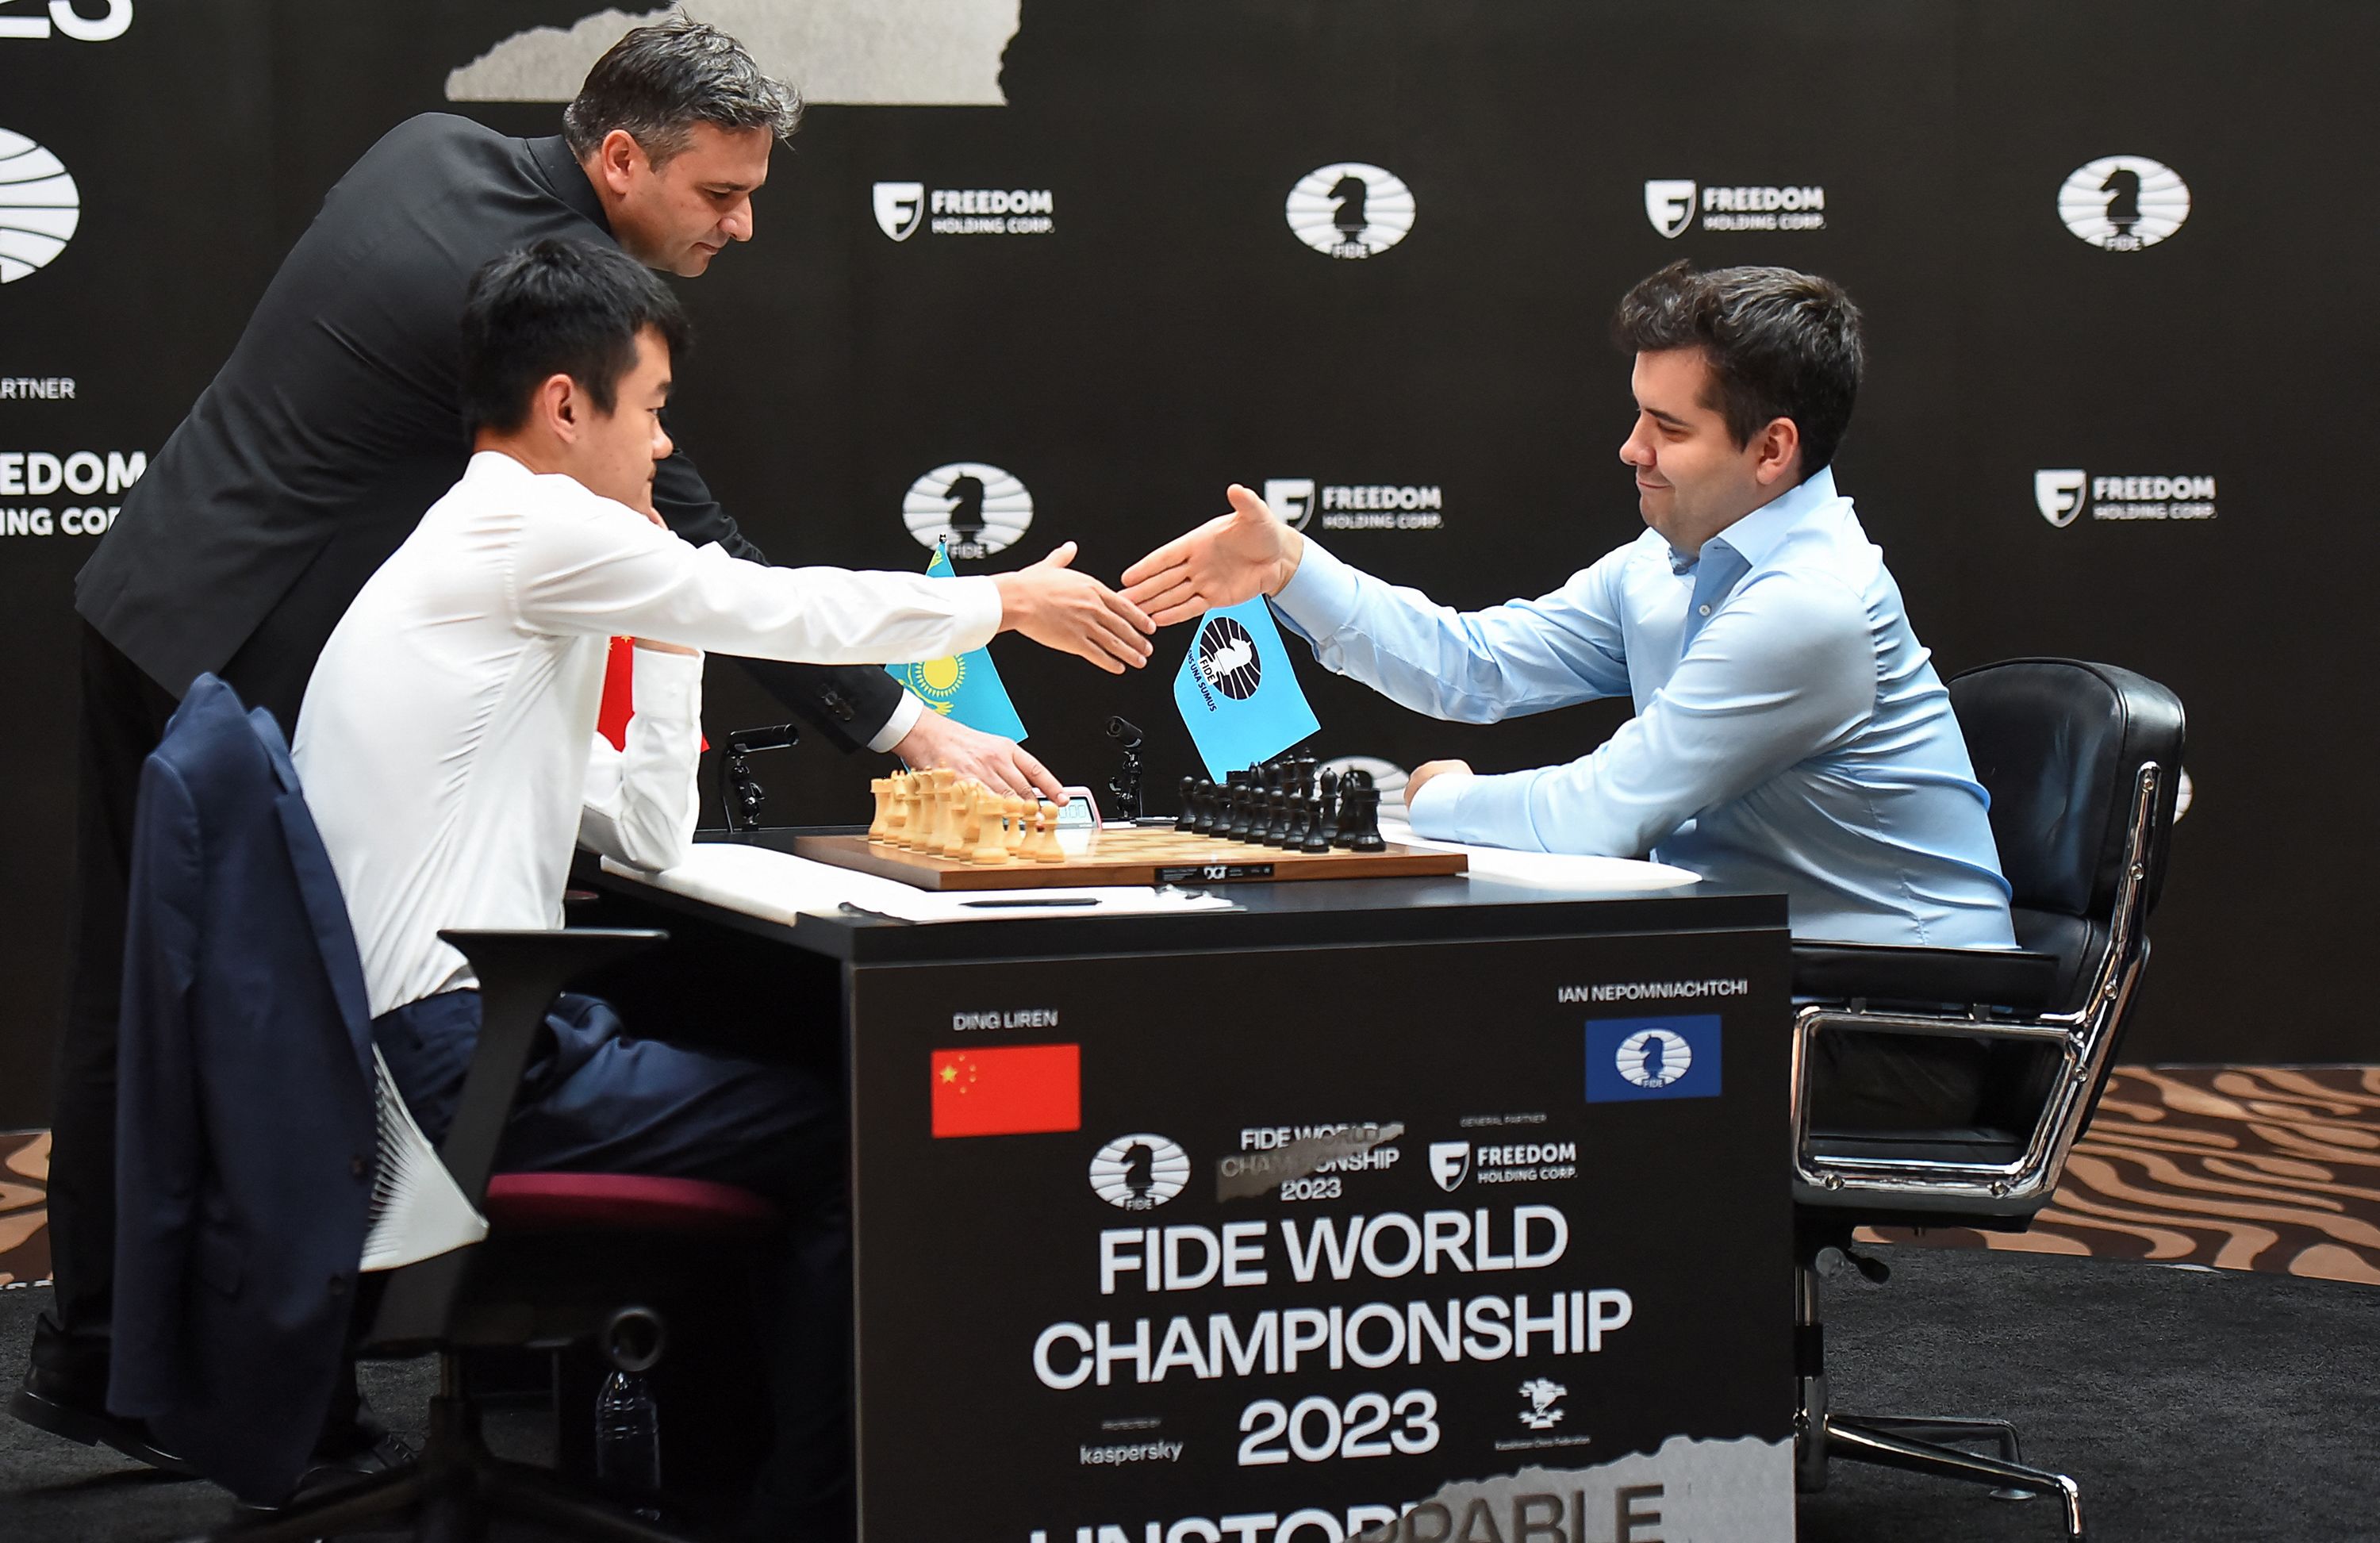 The Best Moments From The FIDE World Championship 